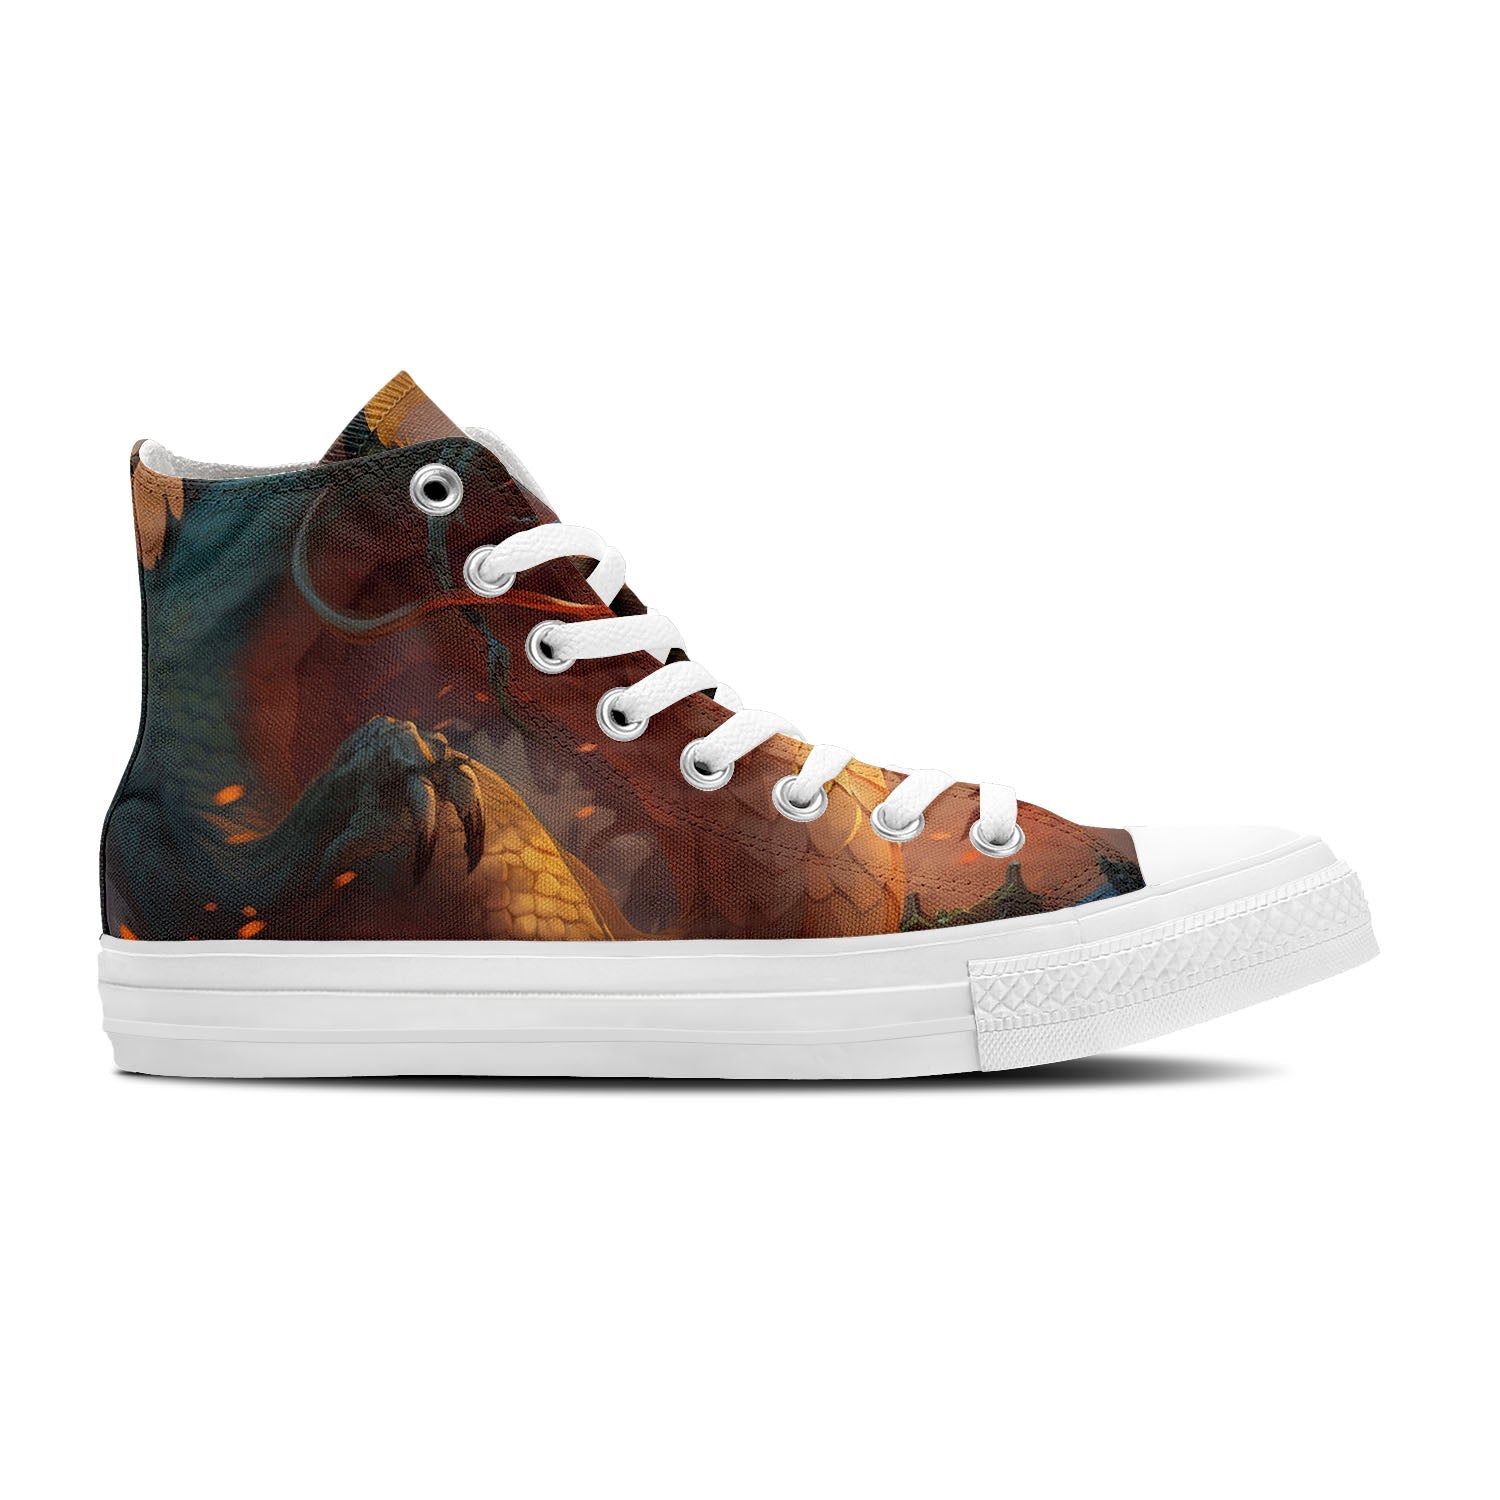 Elevate Your Style with Dragon-Inspired Mid-Top Canvas Shoes - Unisex Fashion Statement